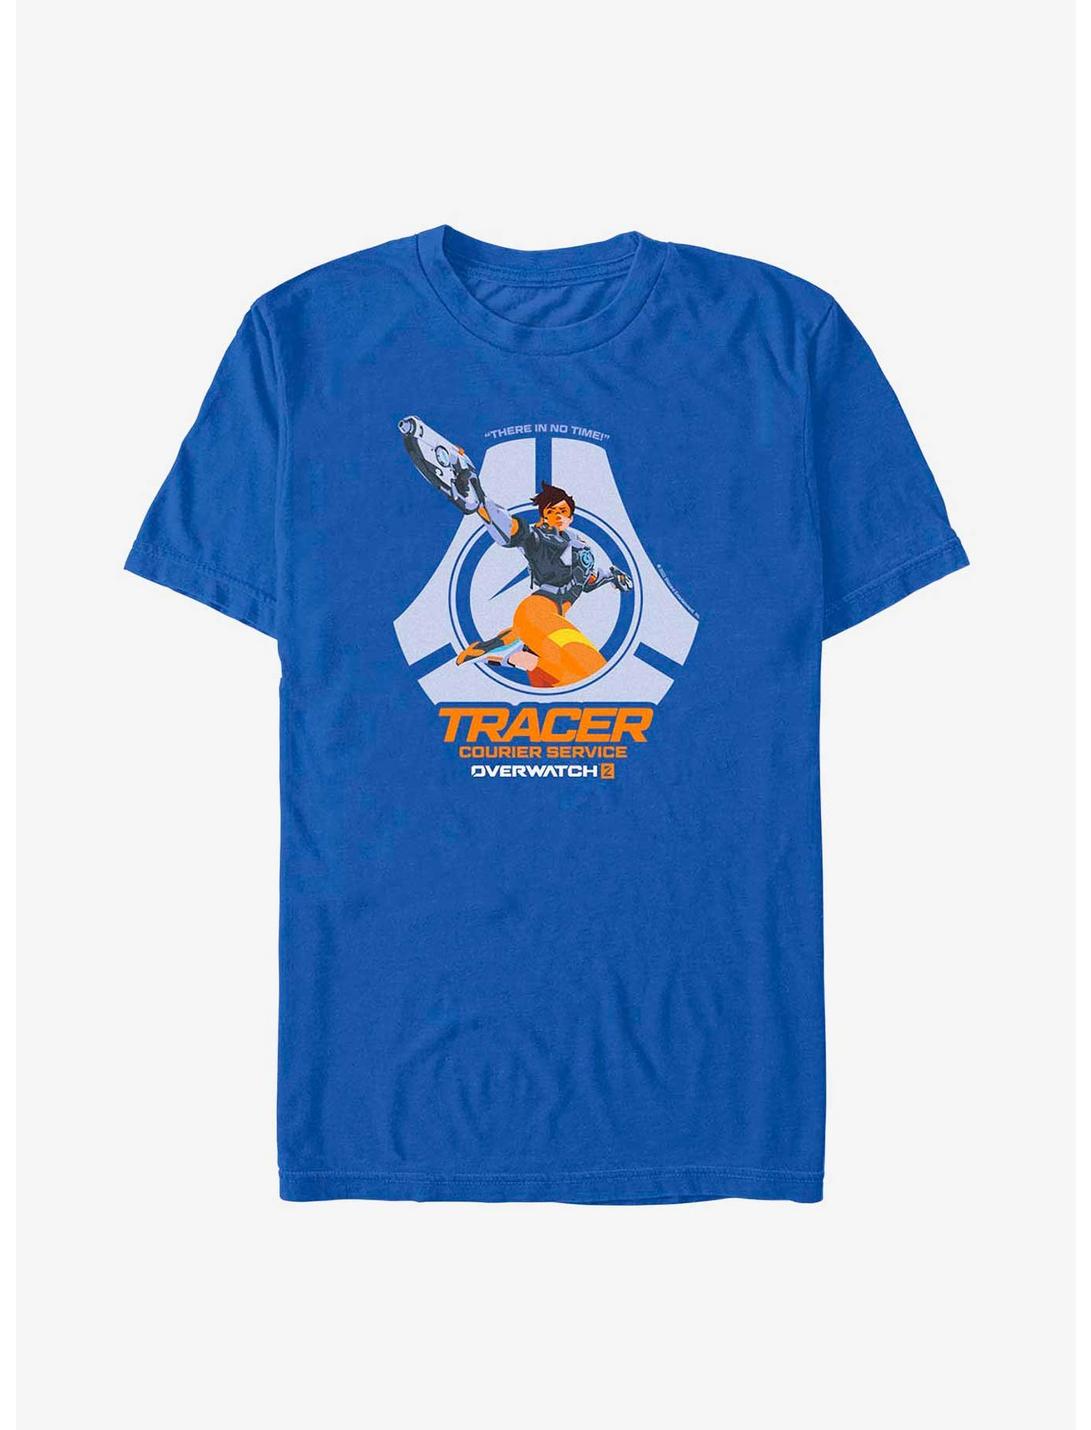 Overwatch 2 Tracer Courier Service T-Shirt, ROYAL, hi-res